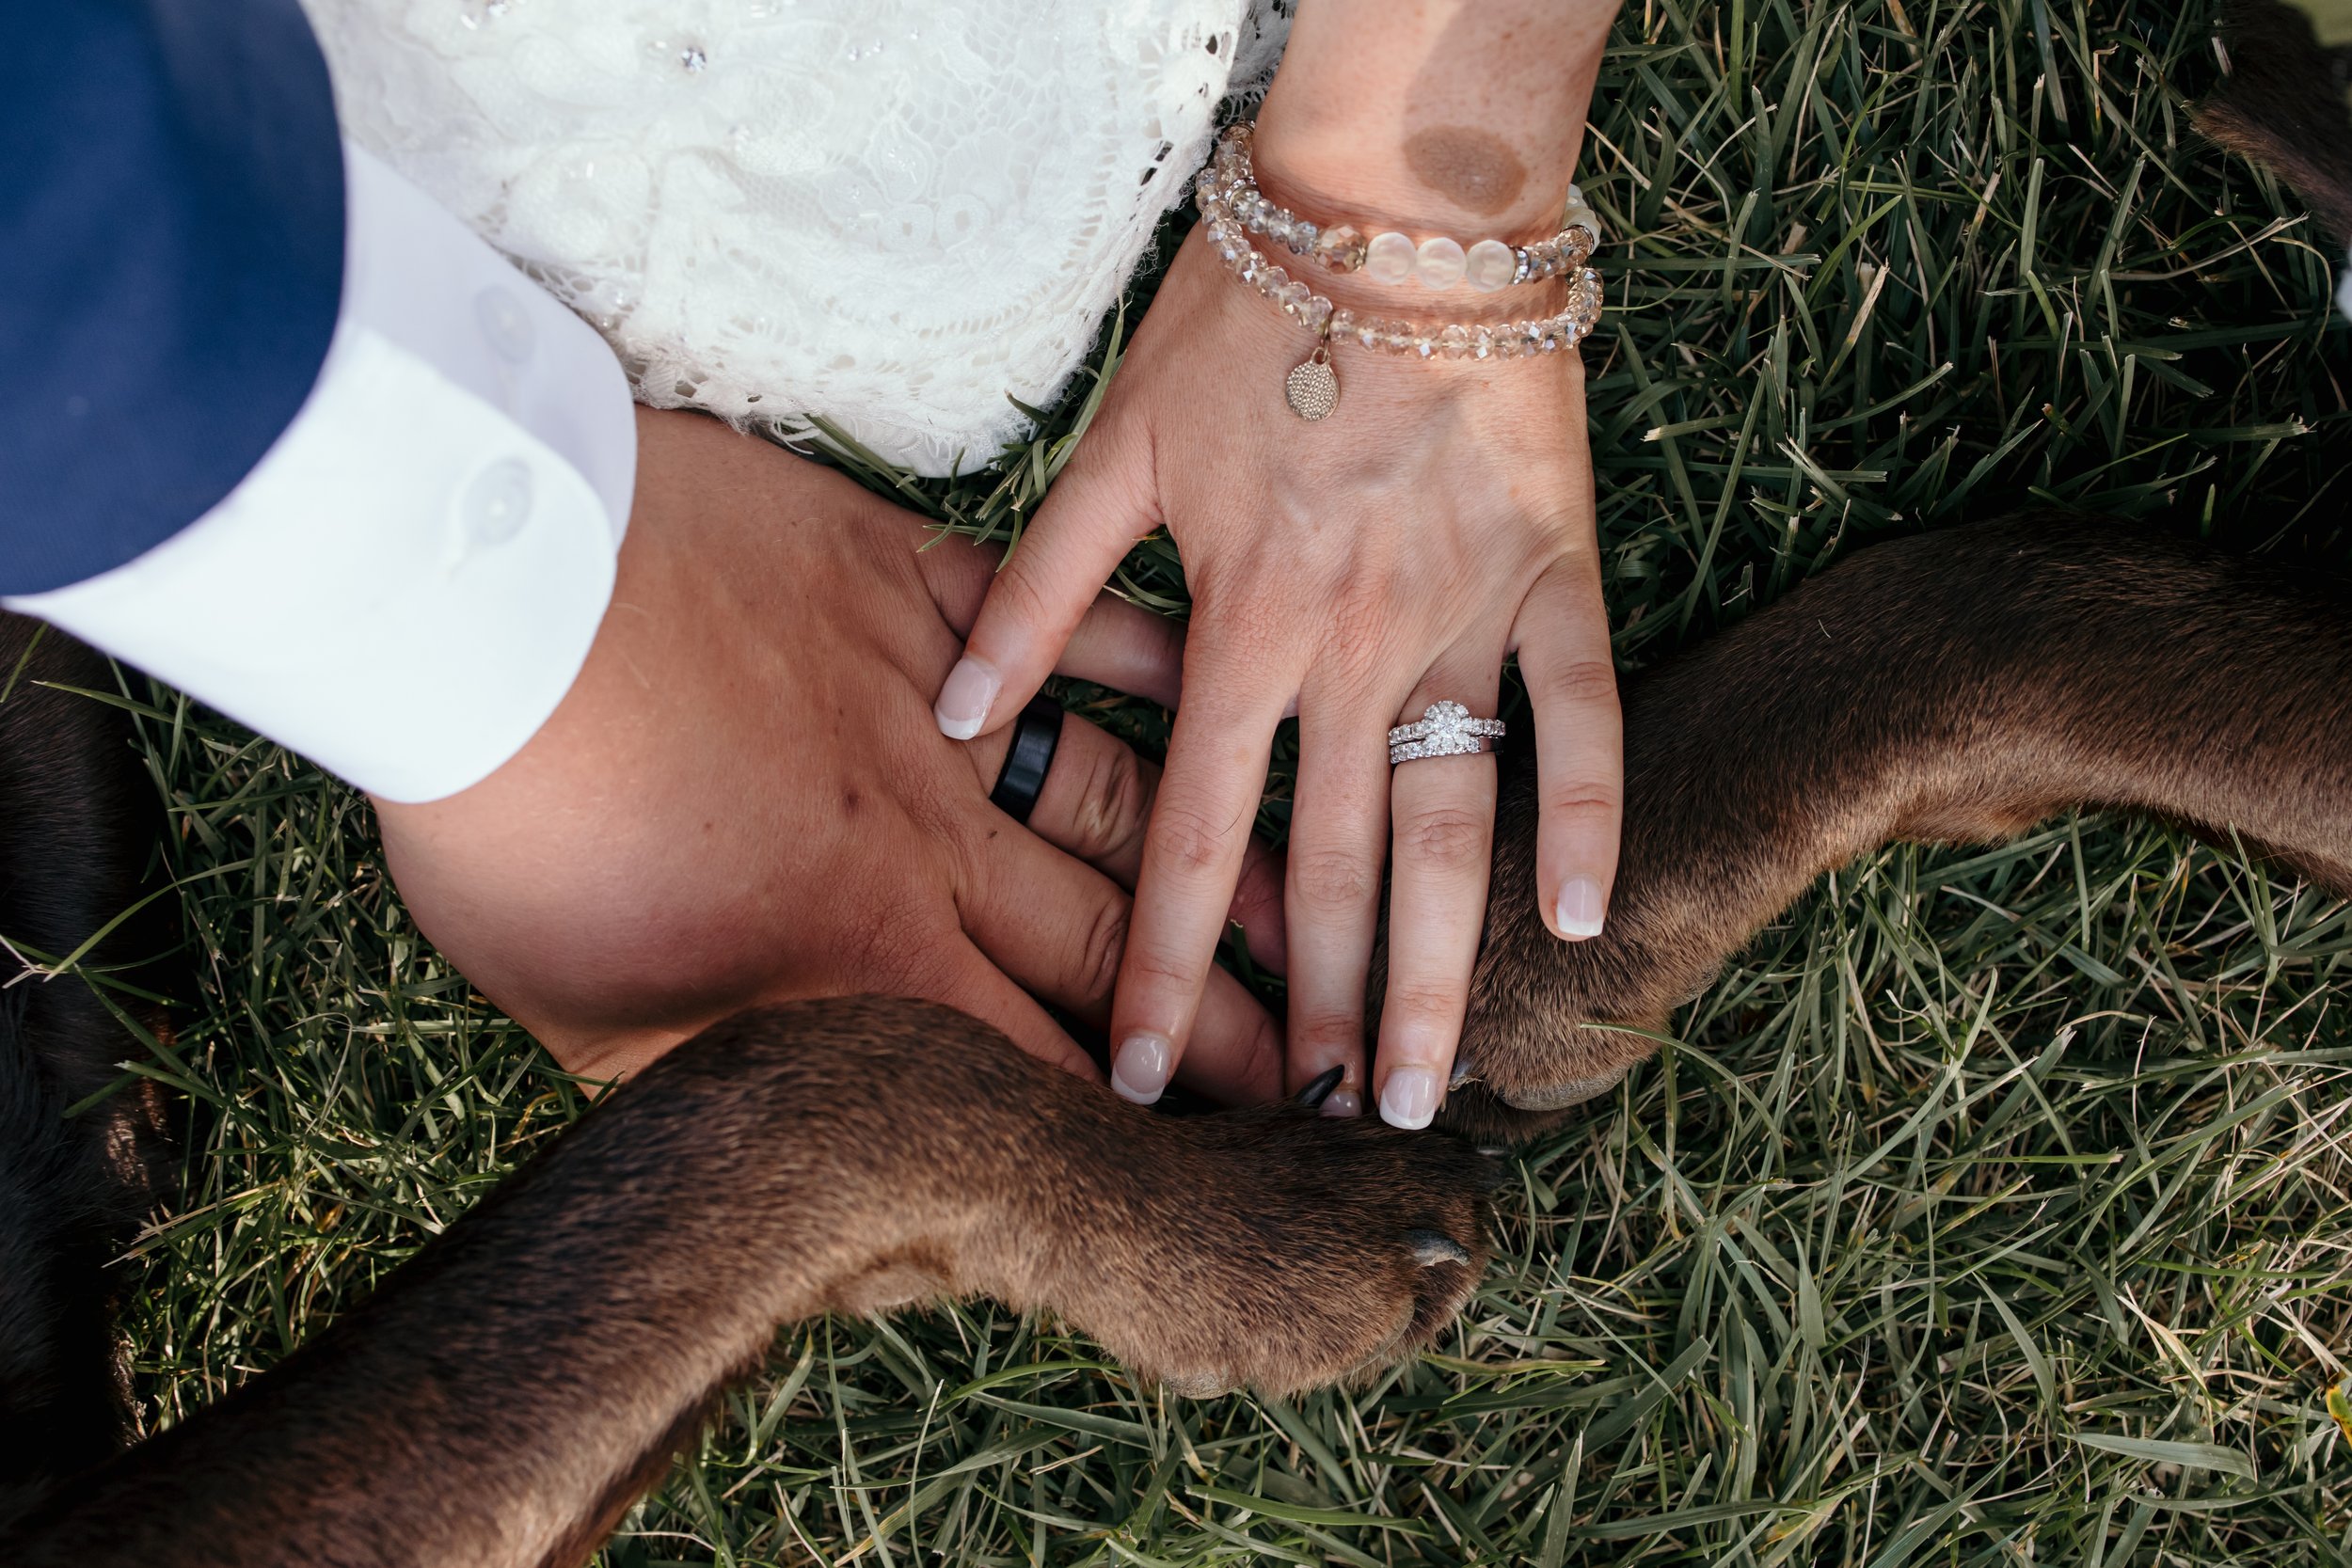 a bride, groom, and two dog paws together in a pile.